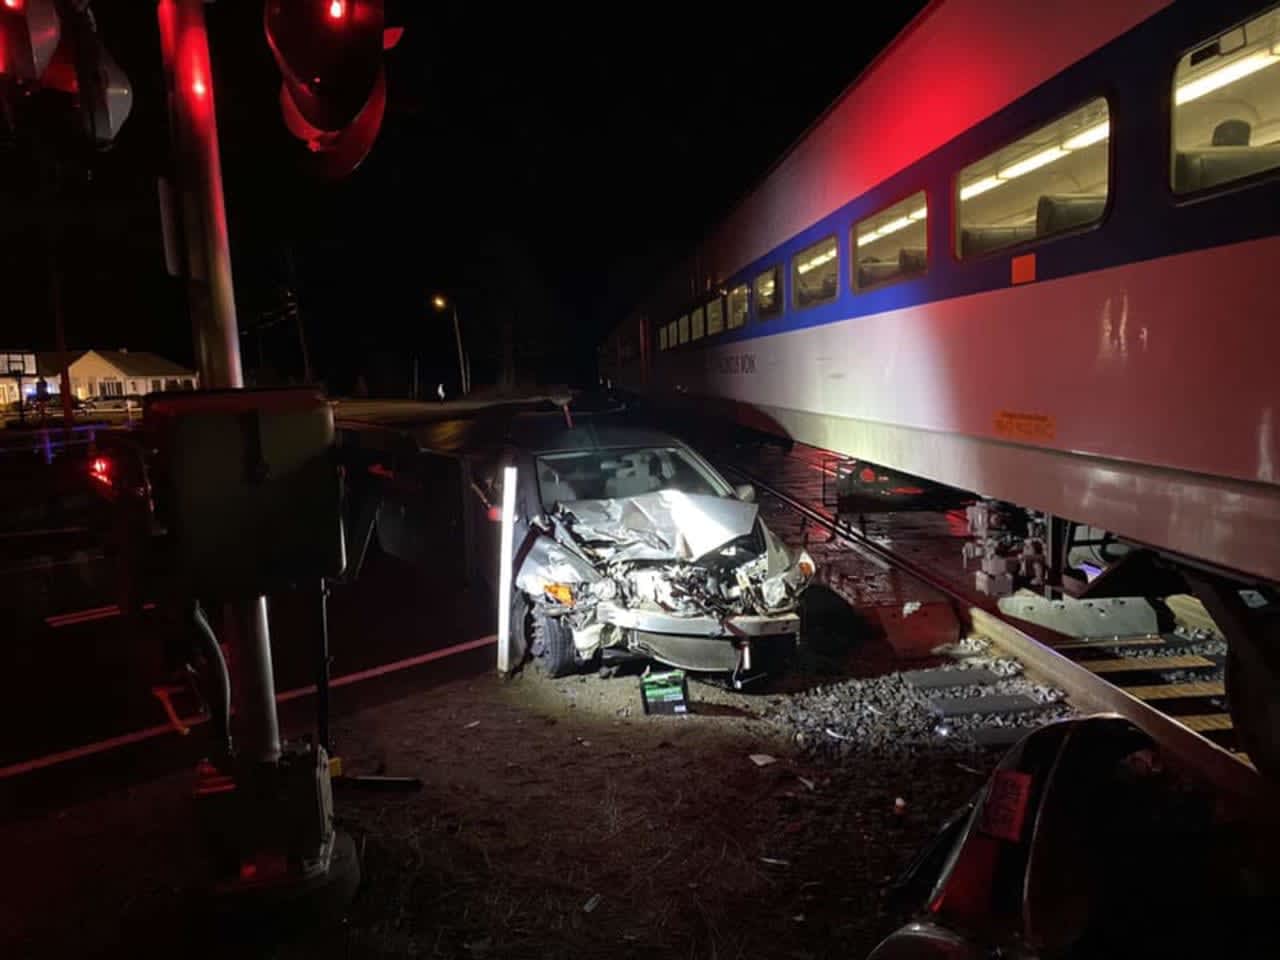 A man was saved from being hit by a train by a local restaurant owner.